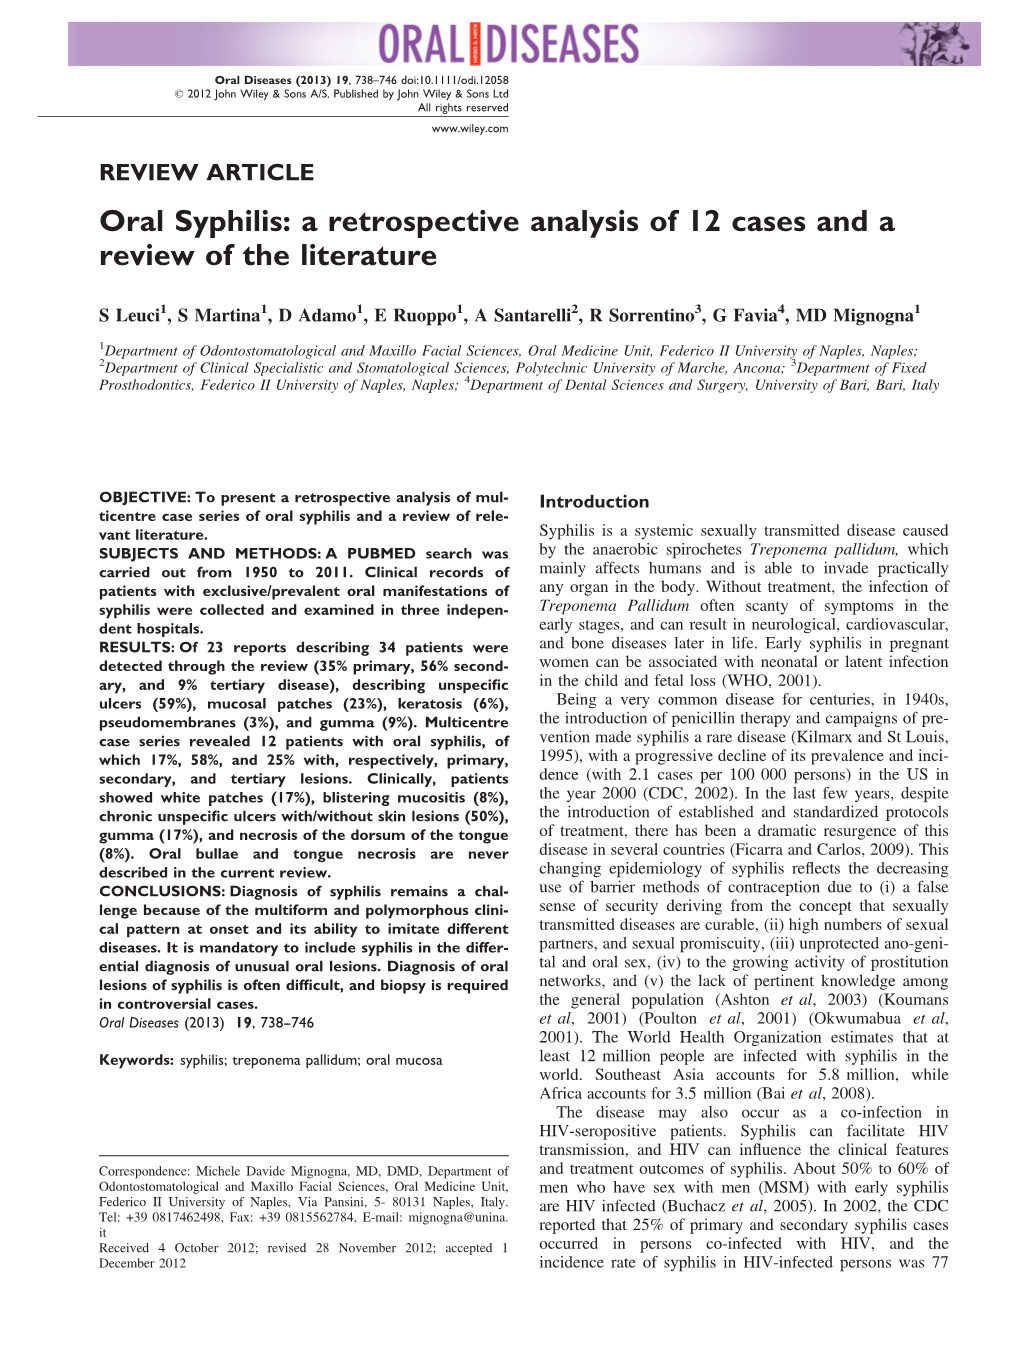 Oral Syphilis: a Retrospective Analysis of 12 Cases and a Review of the Literature